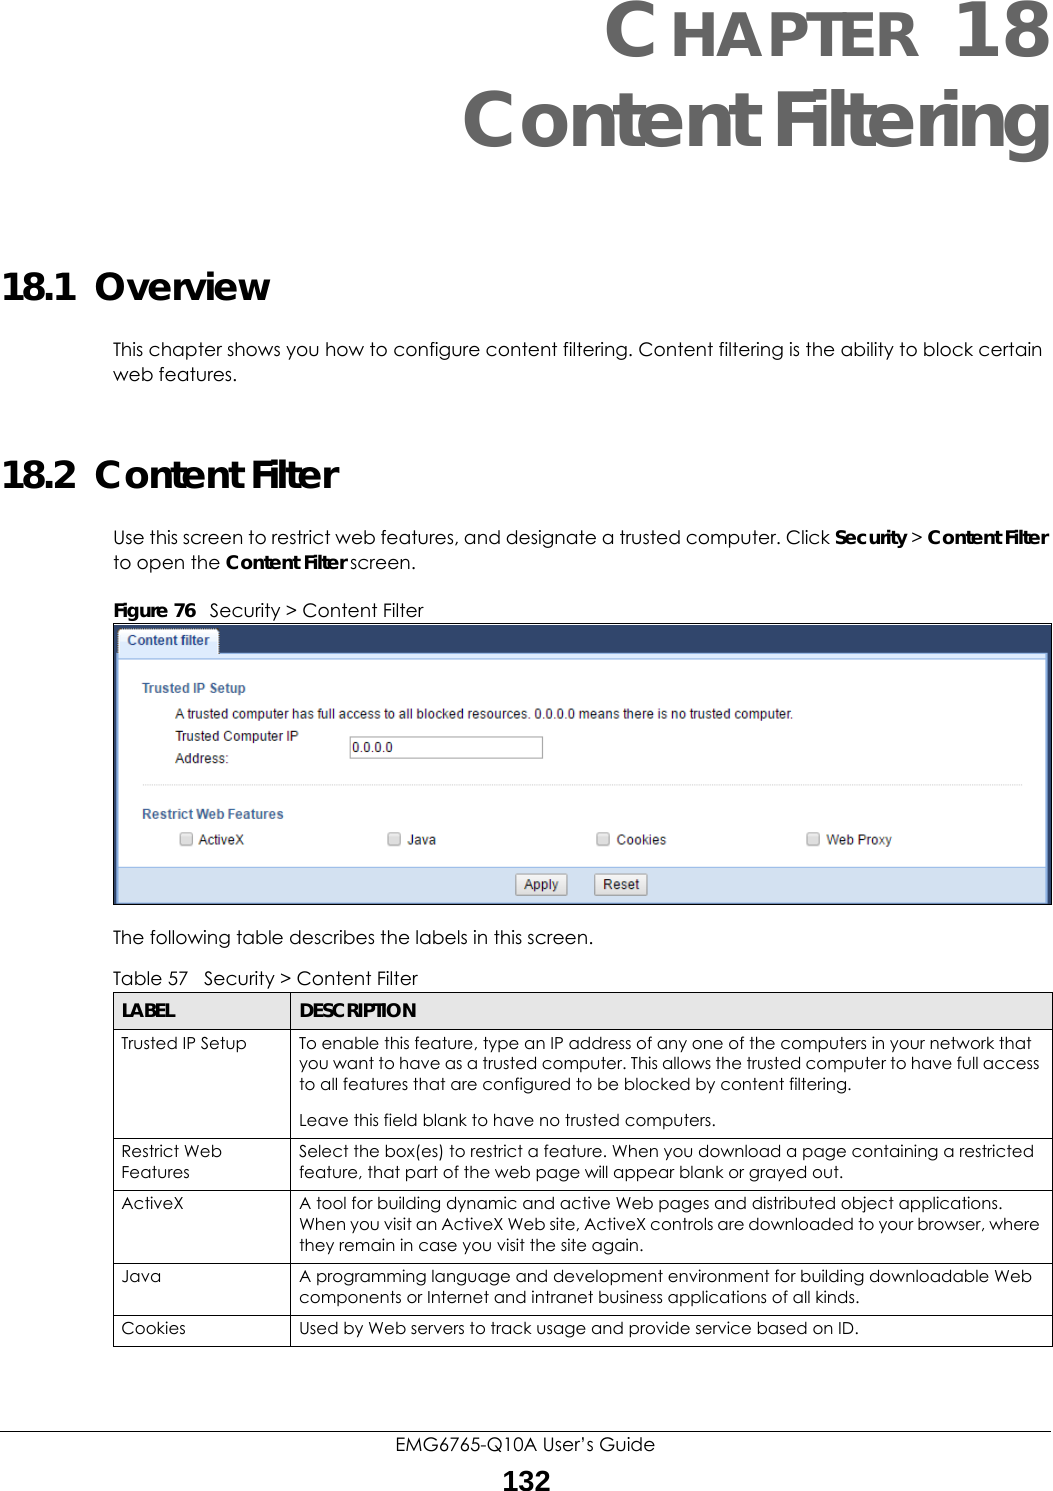 EMG6765-Q10A User’s Guide132CHAPTER 18Content Filtering18.1  OverviewThis chapter shows you how to configure content filtering. Content filtering is the ability to block certain web features.18.2  Content FilterUse this screen to restrict web features, and designate a trusted computer. Click Security &gt; Content Filter to open the Content Filter screen. Figure 76   Security &gt; Content Filter The following table describes the labels in this screen.Table 57   Security &gt; Content Filter LABEL DESCRIPTIONTrusted IP Setup To enable this feature, type an IP address of any one of the computers in your network that you want to have as a trusted computer. This allows the trusted computer to have full access to all features that are configured to be blocked by content filtering.Leave this field blank to have no trusted computers.Restrict Web FeaturesSelect the box(es) to restrict a feature. When you download a page containing a restricted feature, that part of the web page will appear blank or grayed out.ActiveX  A tool for building dynamic and active Web pages and distributed object applications. When you visit an ActiveX Web site, ActiveX controls are downloaded to your browser, where they remain in case you visit the site again. Java A programming language and development environment for building downloadable Web components or Internet and intranet business applications of all kinds.Cookies Used by Web servers to track usage and provide service based on ID. 